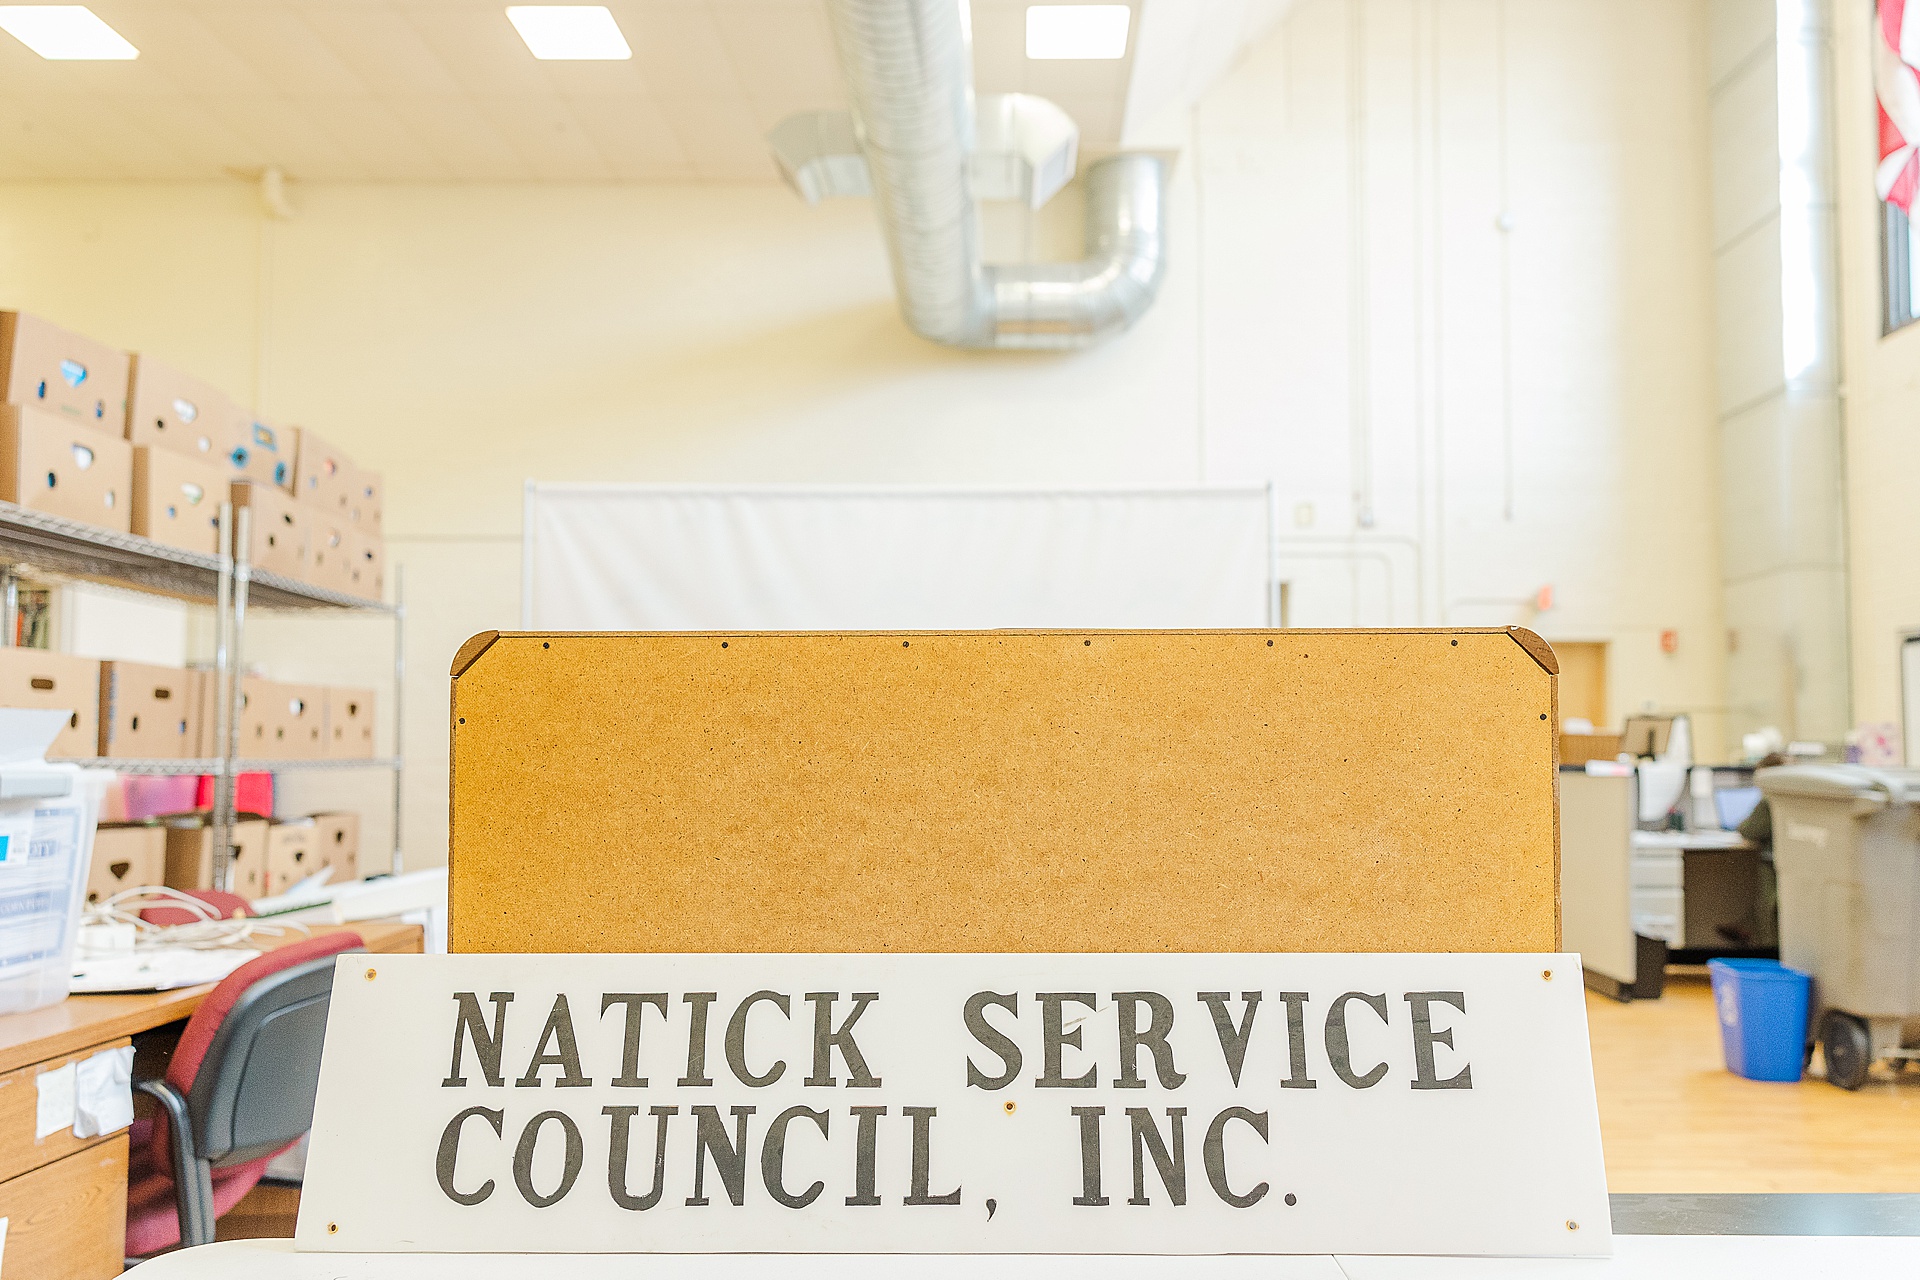 Natick Service Council Branding Photo Session with Sara Sniderman Photography in Natick Massachusetts